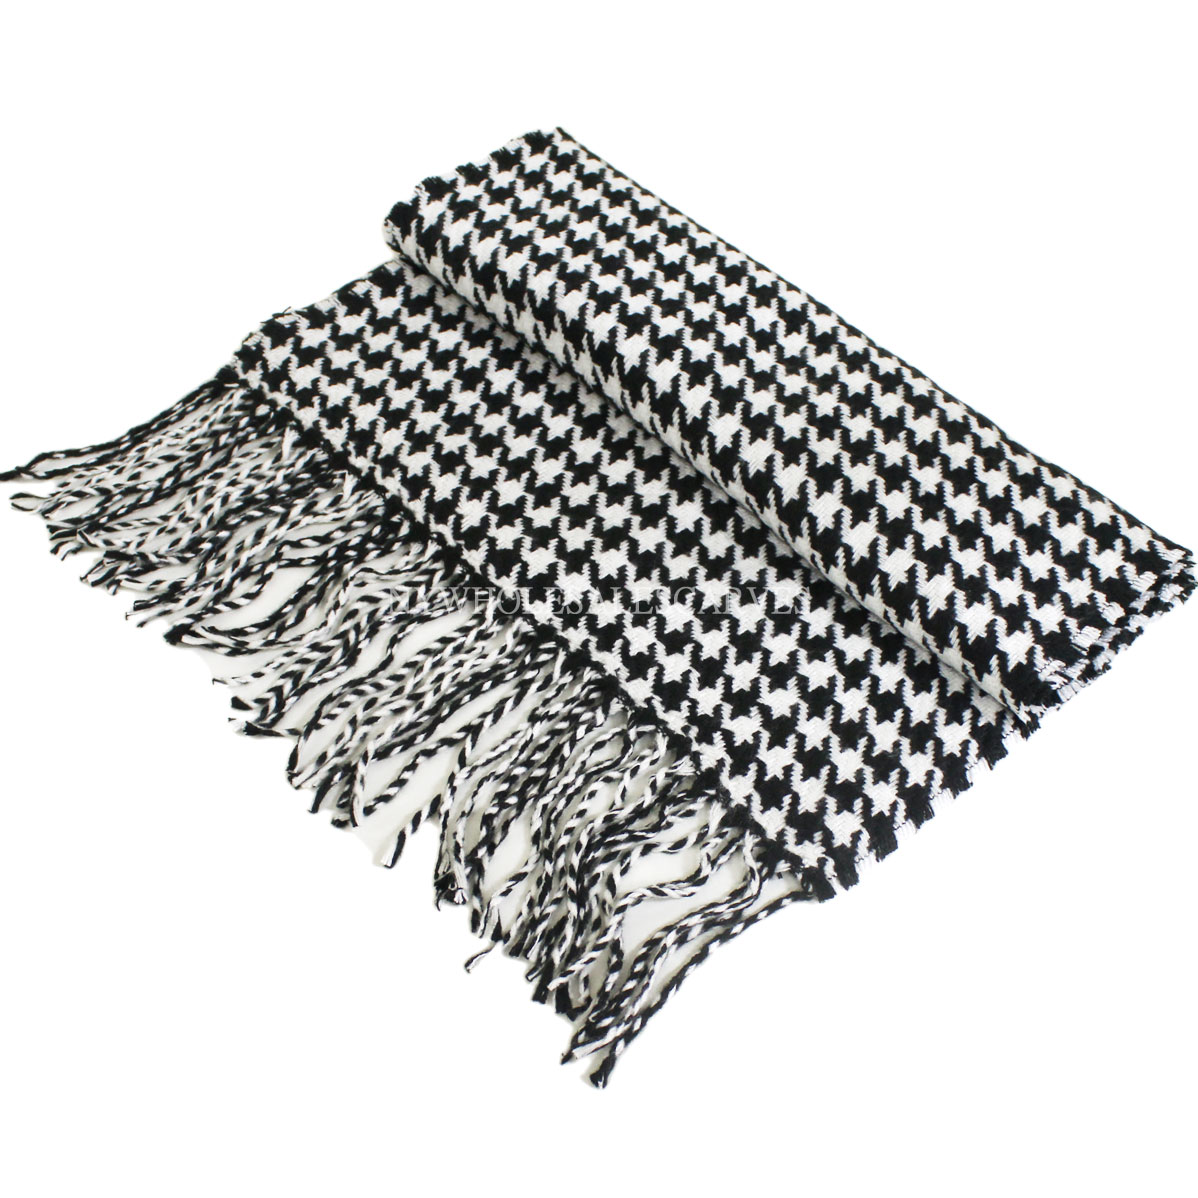 Houndstooth Plaid Scarf #06-05 Color: Black & White [06-5] - $3.28 ...